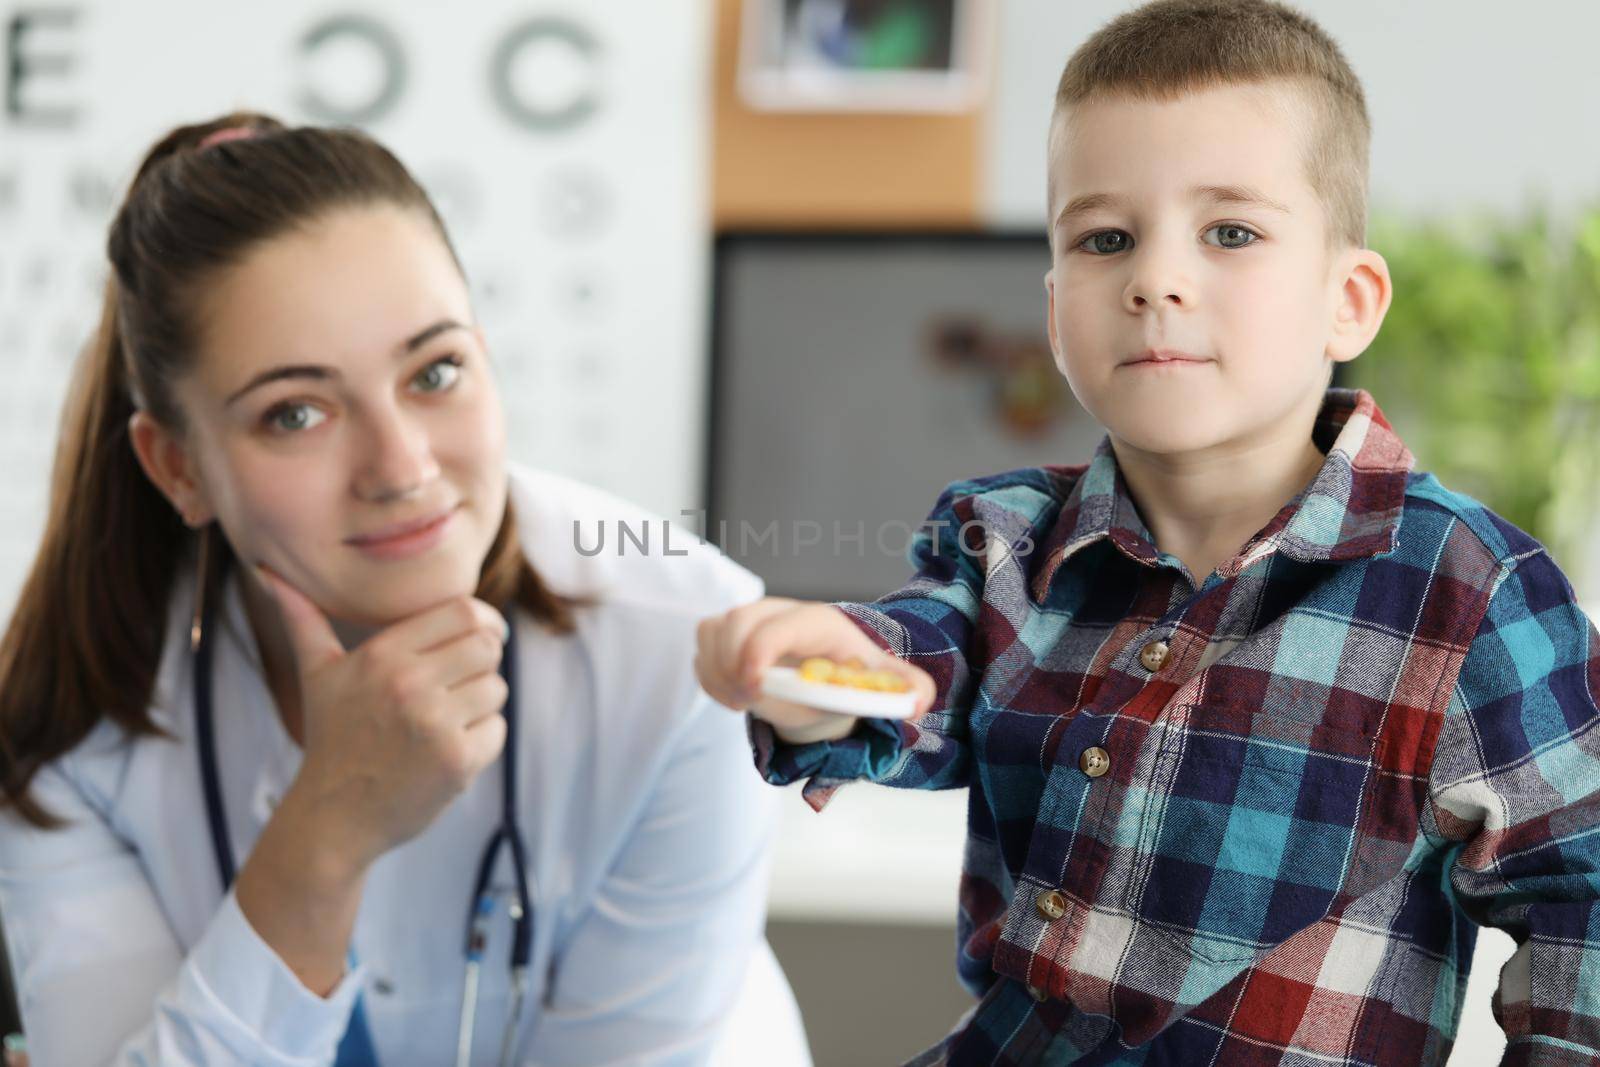 Little boy holding yellow gelatin capsules at doctor appointment. Taking vitamin D and preventing rickets in children concept